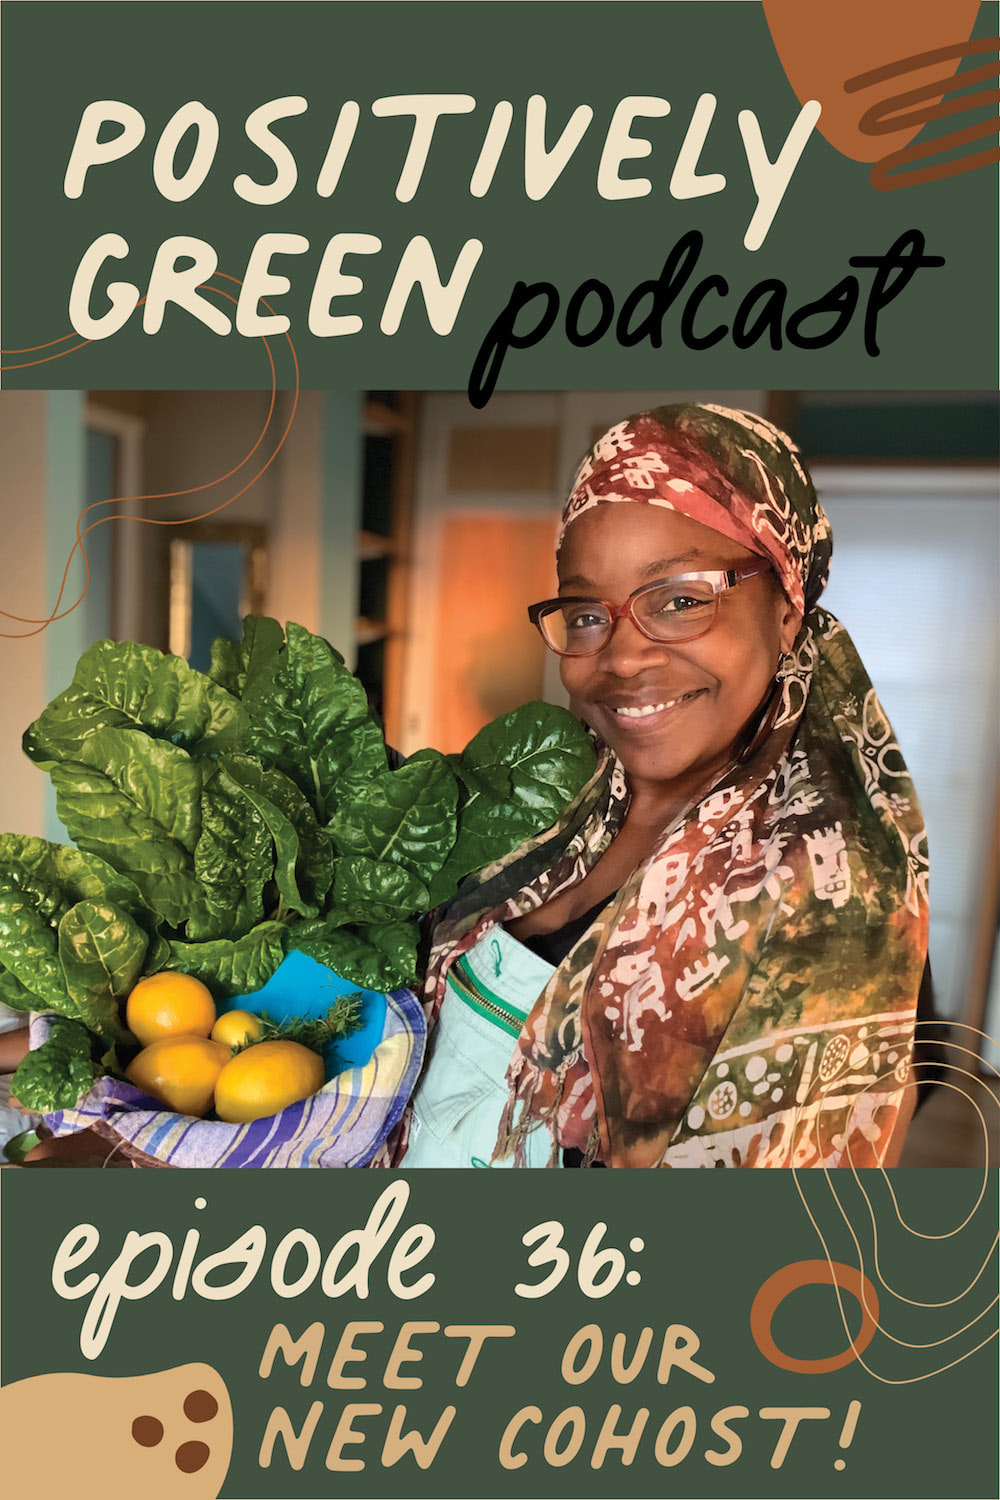 Episode 36 Positively Green Podcast Meet our new cohost Suzette Chaumette